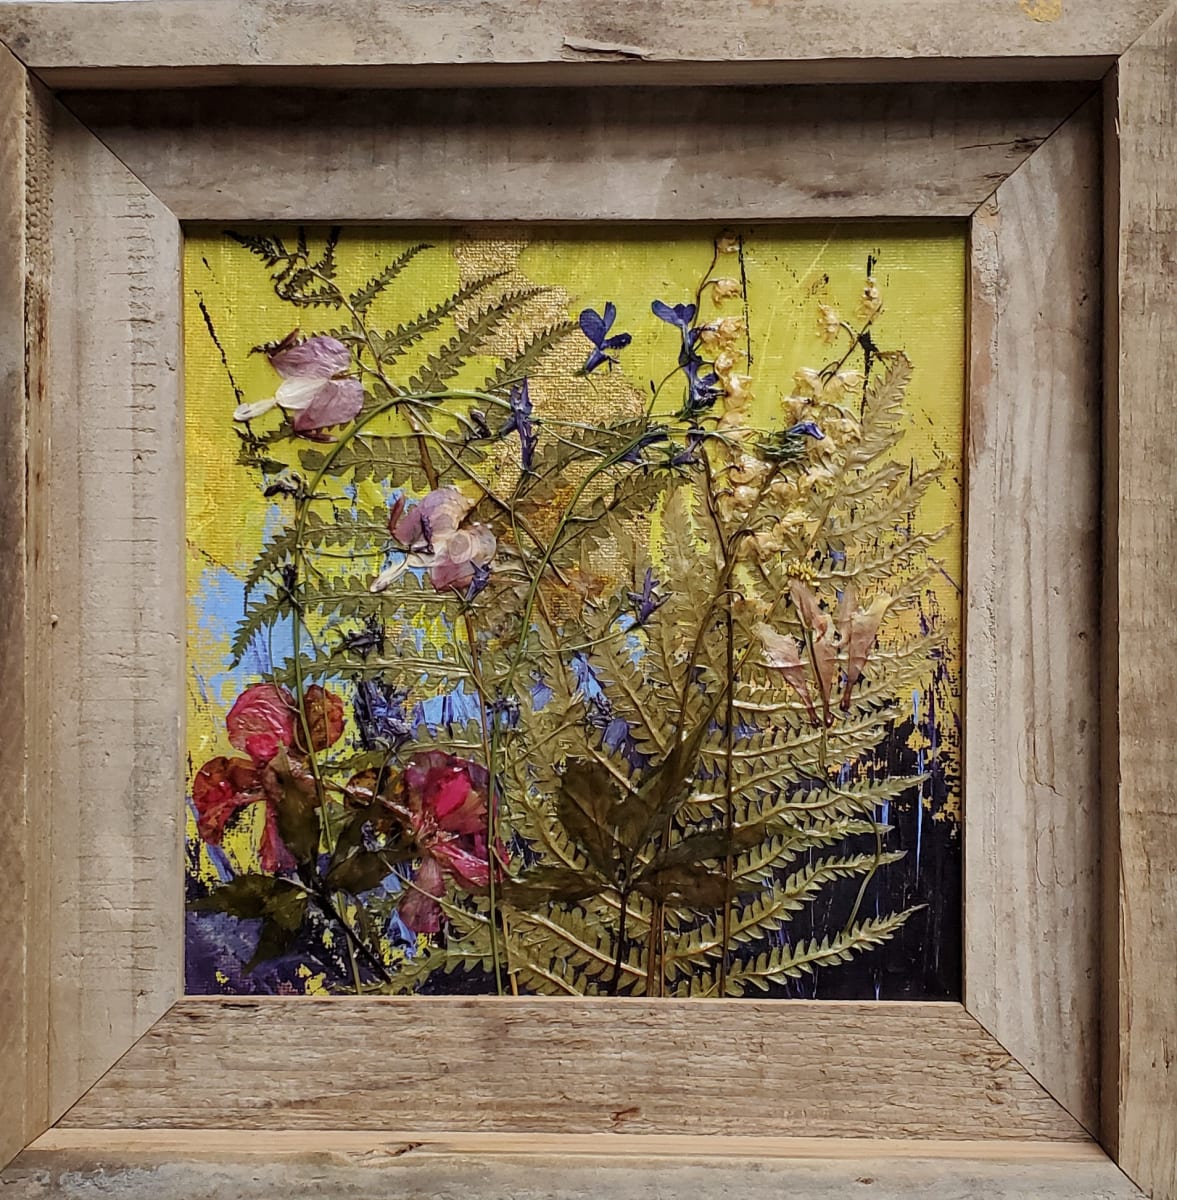 OG Weedy Garden #1 by Jill Seiler  Image: You know I love my weedy garden.  These are flowers from there,  pressed and adhered to acrylic panels with gold leaf.